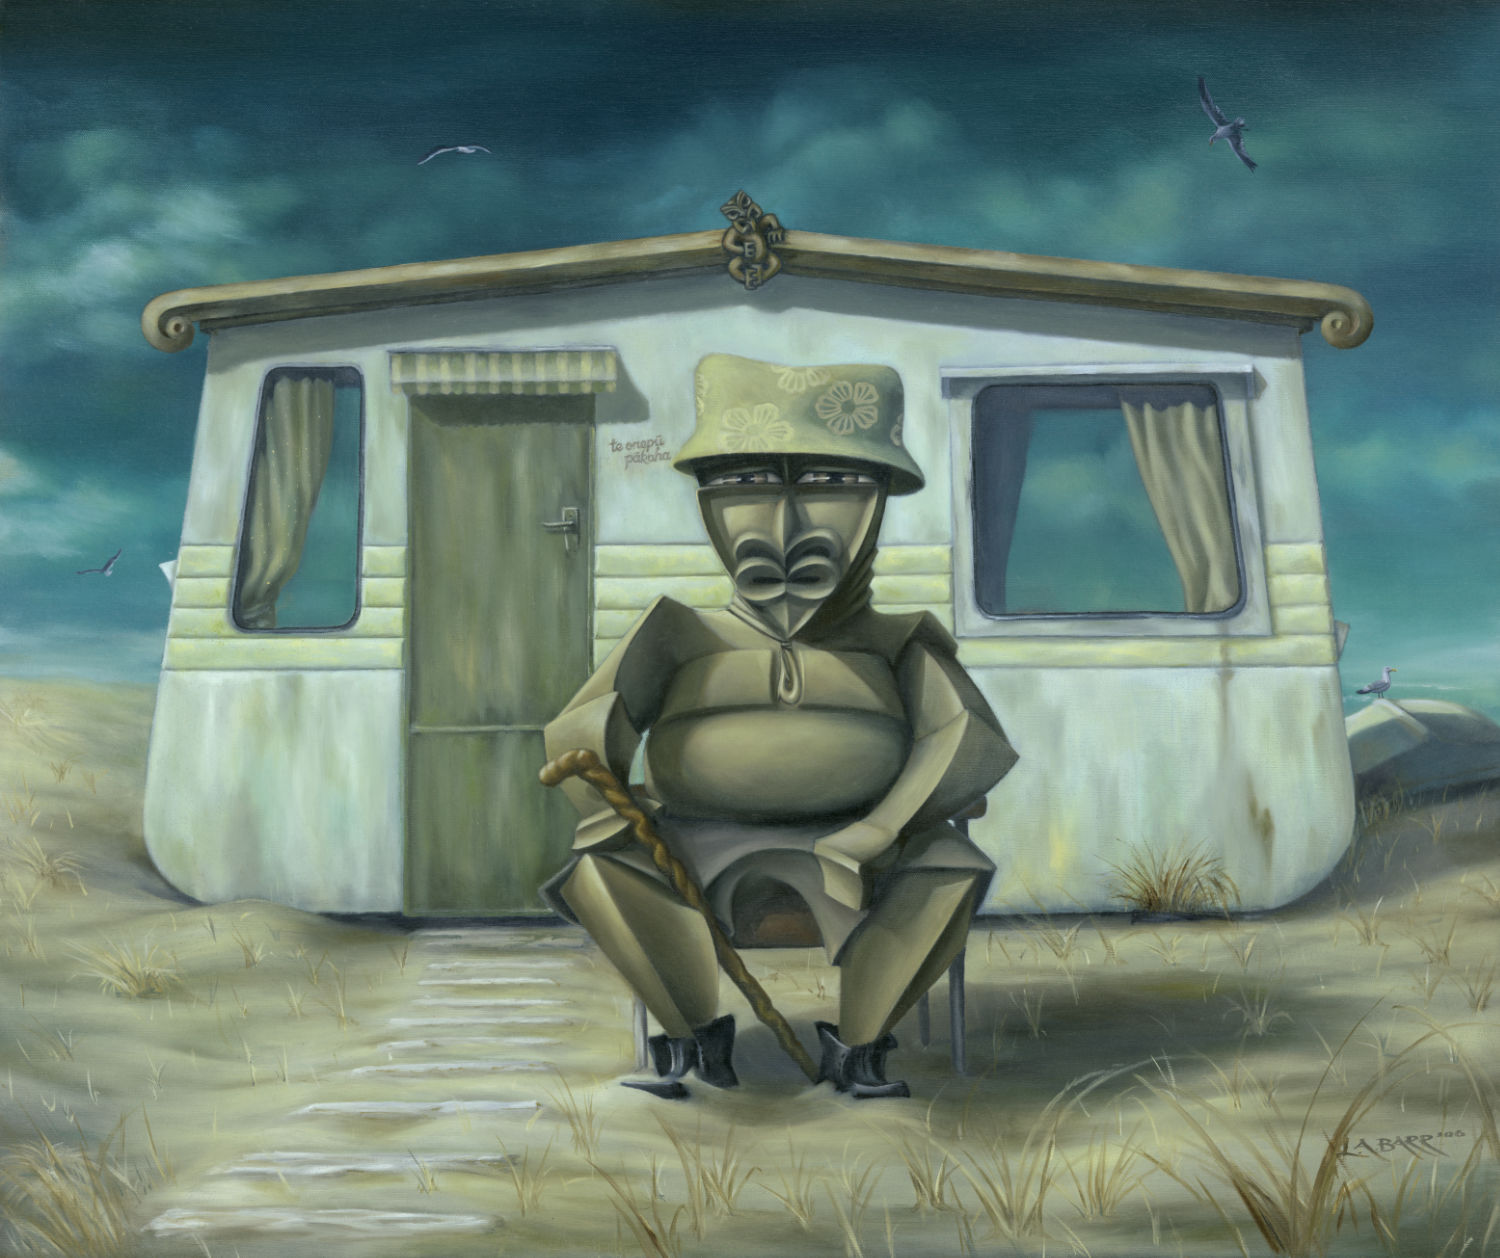 Tiki figure sits in front of beach caravan contemplating, painting from Liam Barr